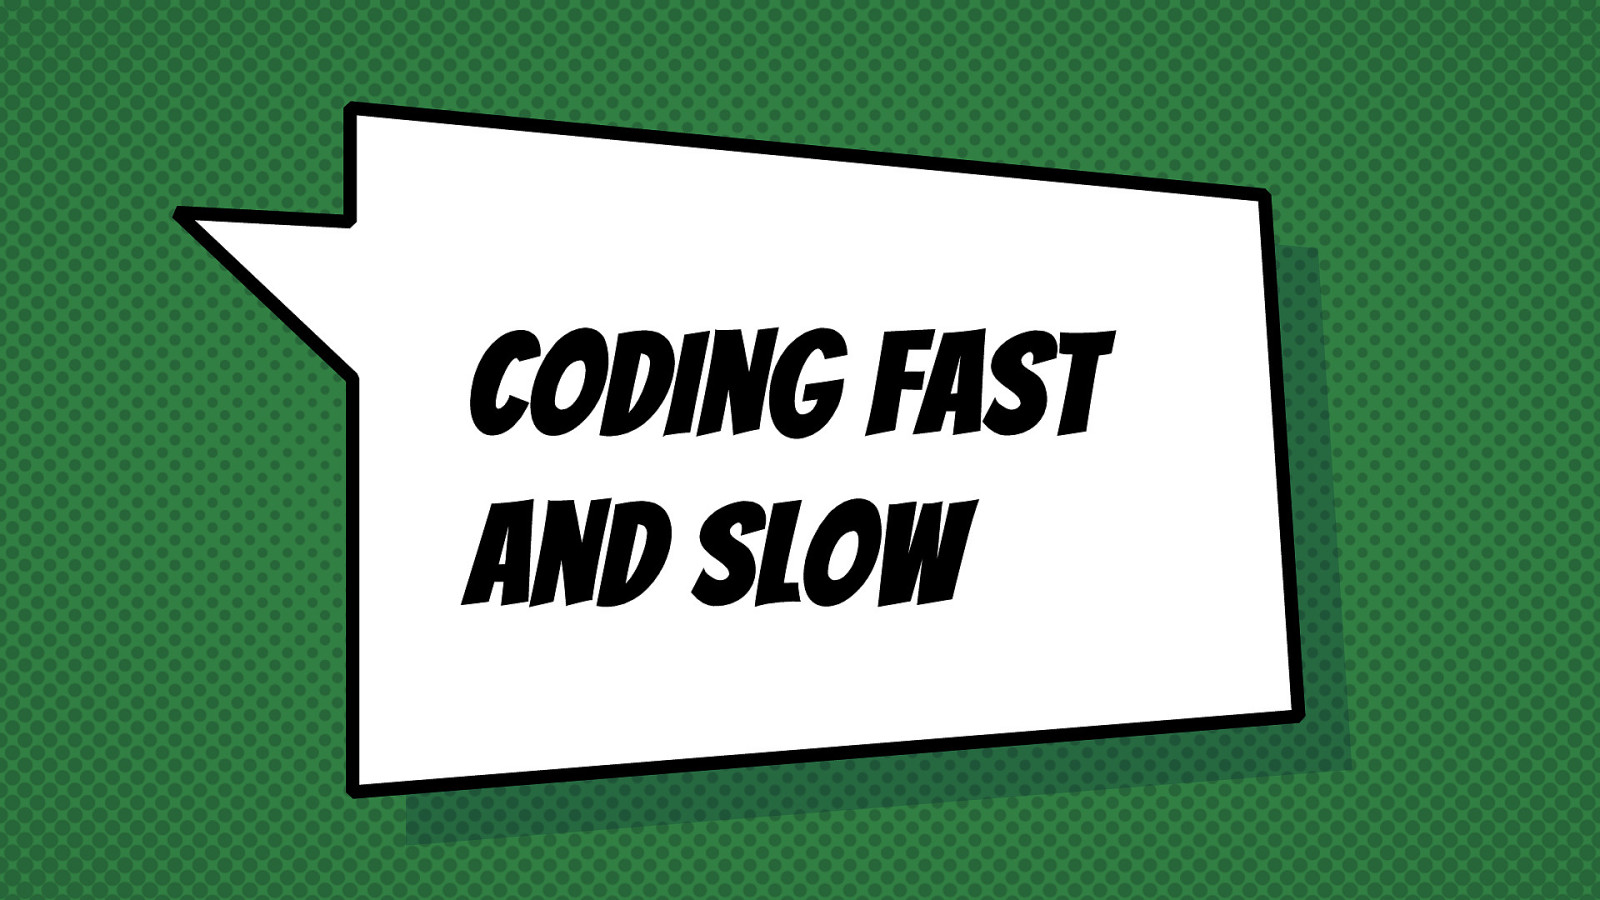 Coding Fast and Slow: Applying Kahneman’s Insights to Improve Development Practices and Efficiency